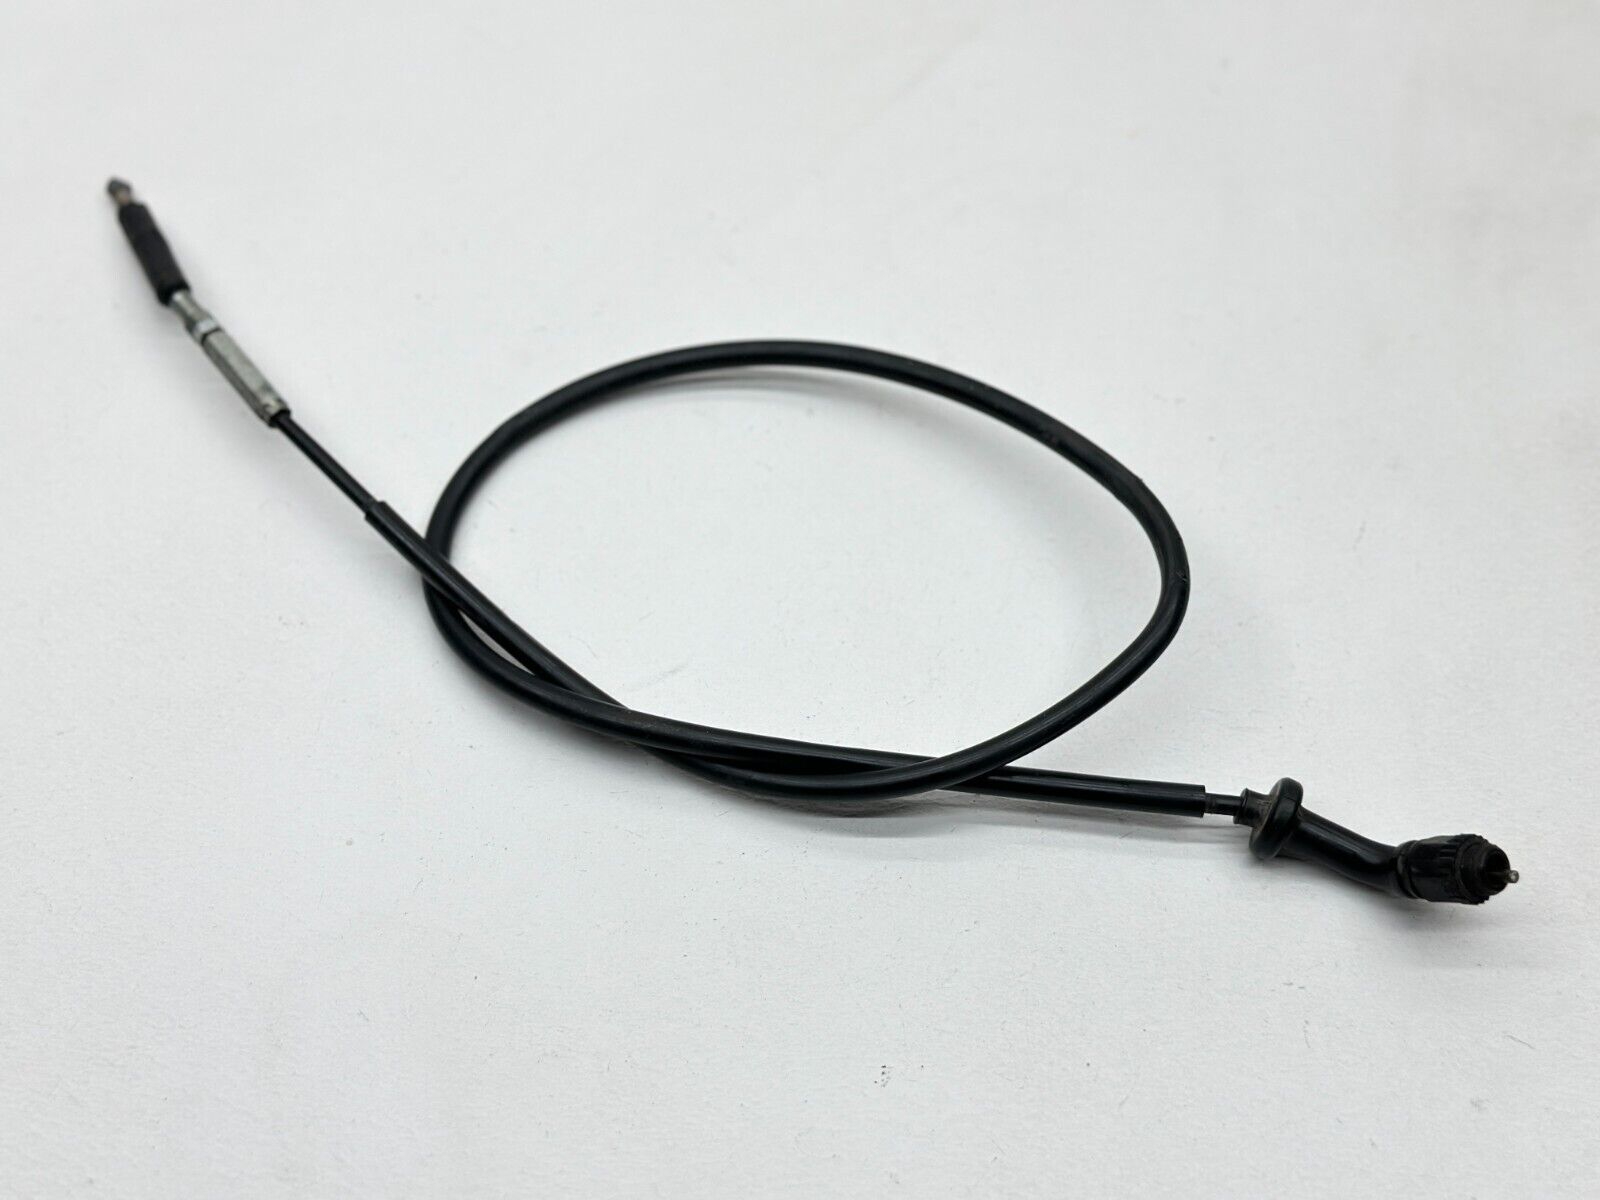 2001 Suzuki RM125 Motorcycle Throttle Cable Assembly 58300-37F01 Black RM 125